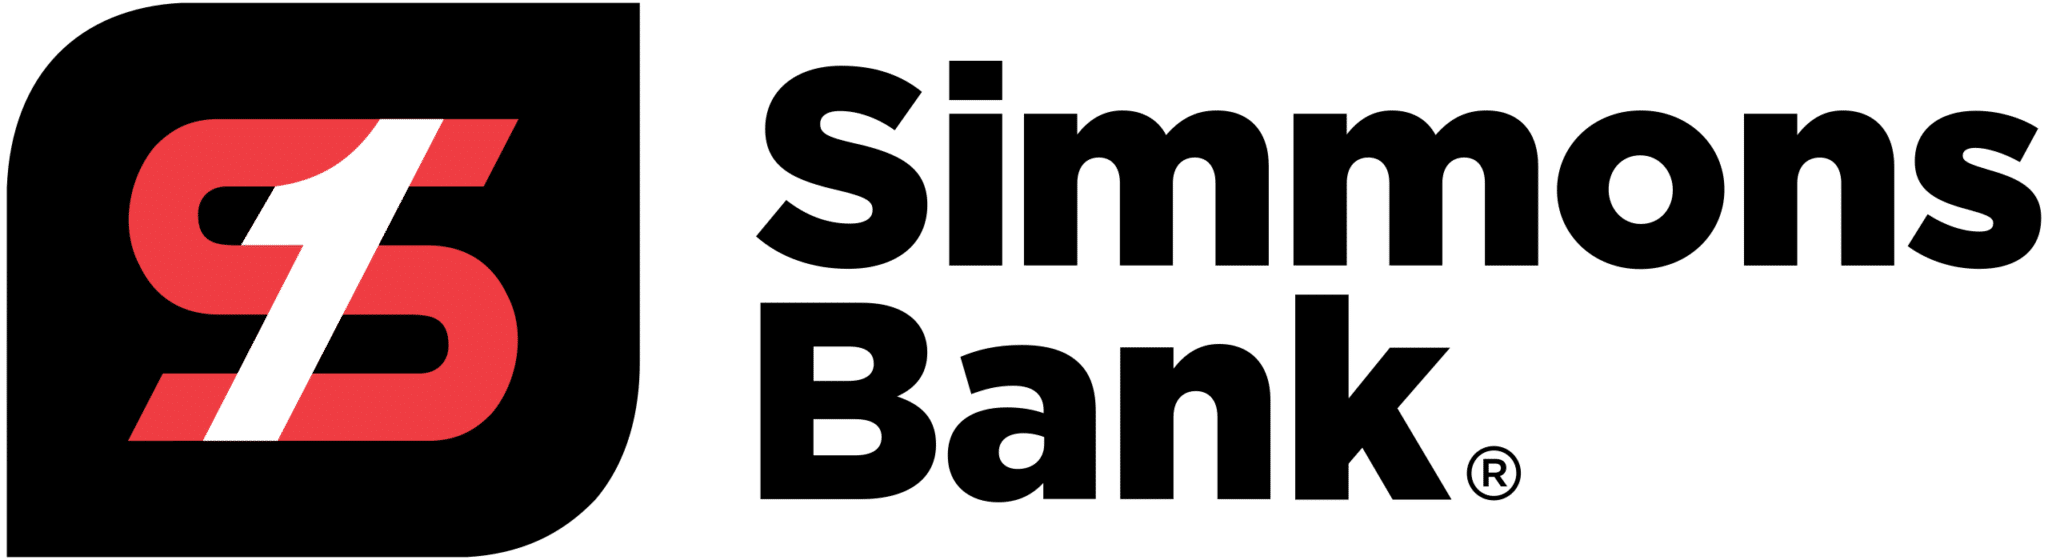 Simmons Bank Logo: A red S with a 1 in the middle of it on a black background.